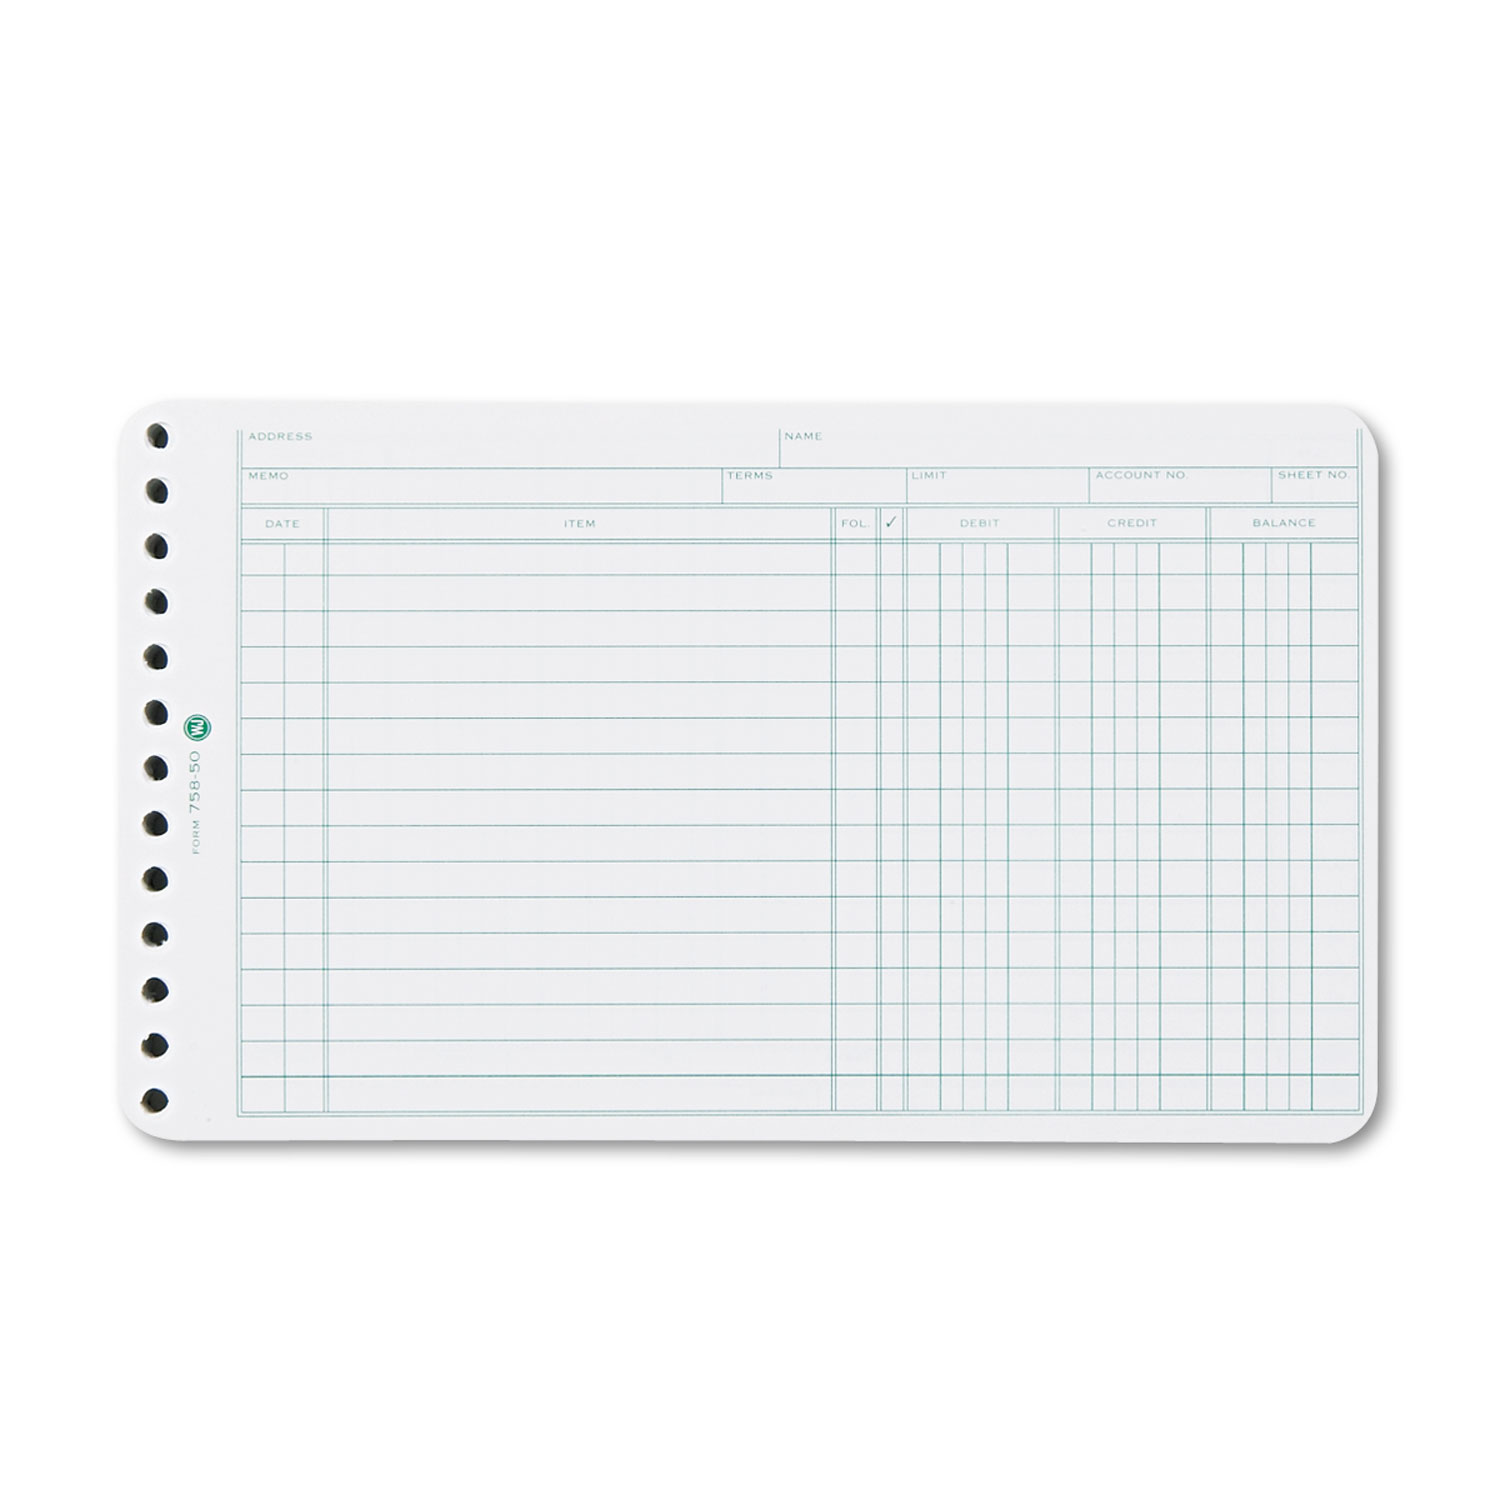 Extra Sheets for Six-Ring Ledger Binder, 100/Pack